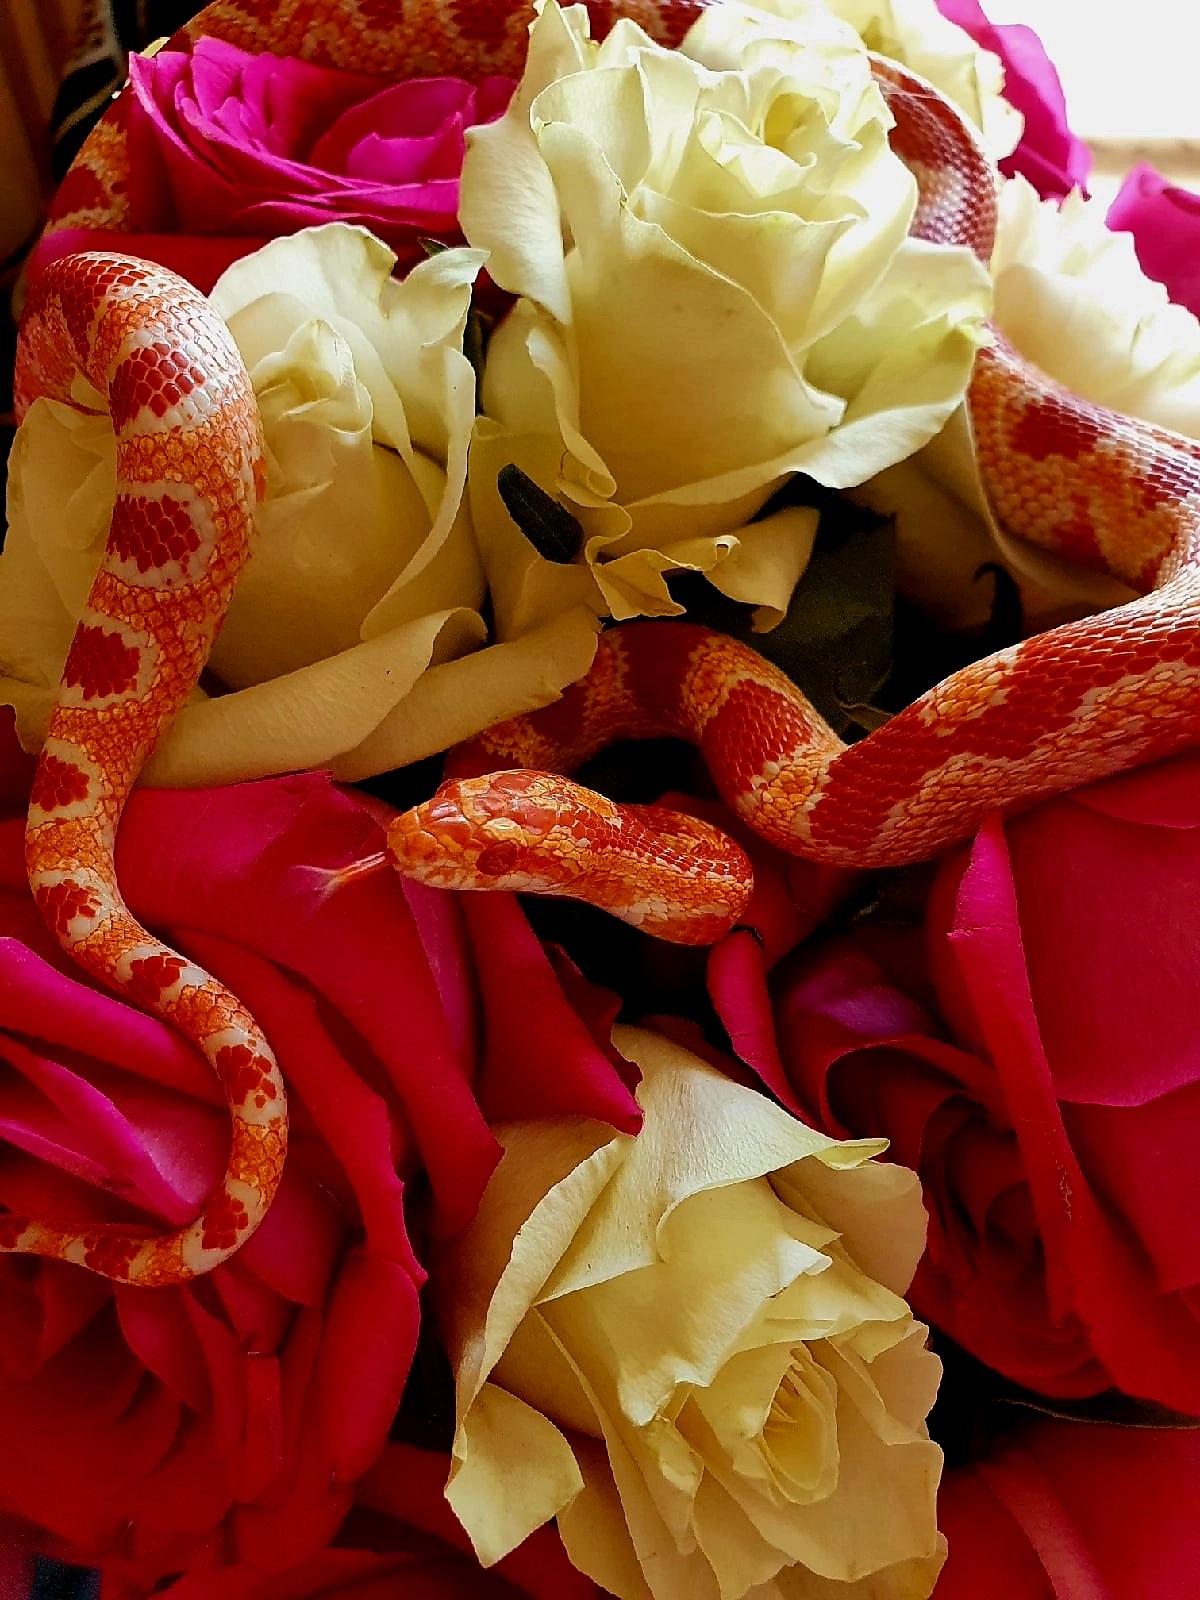 My Two Snakes) - My, Boa, Imperial boa constrictor, Maize snake, Skid, Snake, Terrariumistics, Flowers, Mobile photography, Longpost, Reptiles